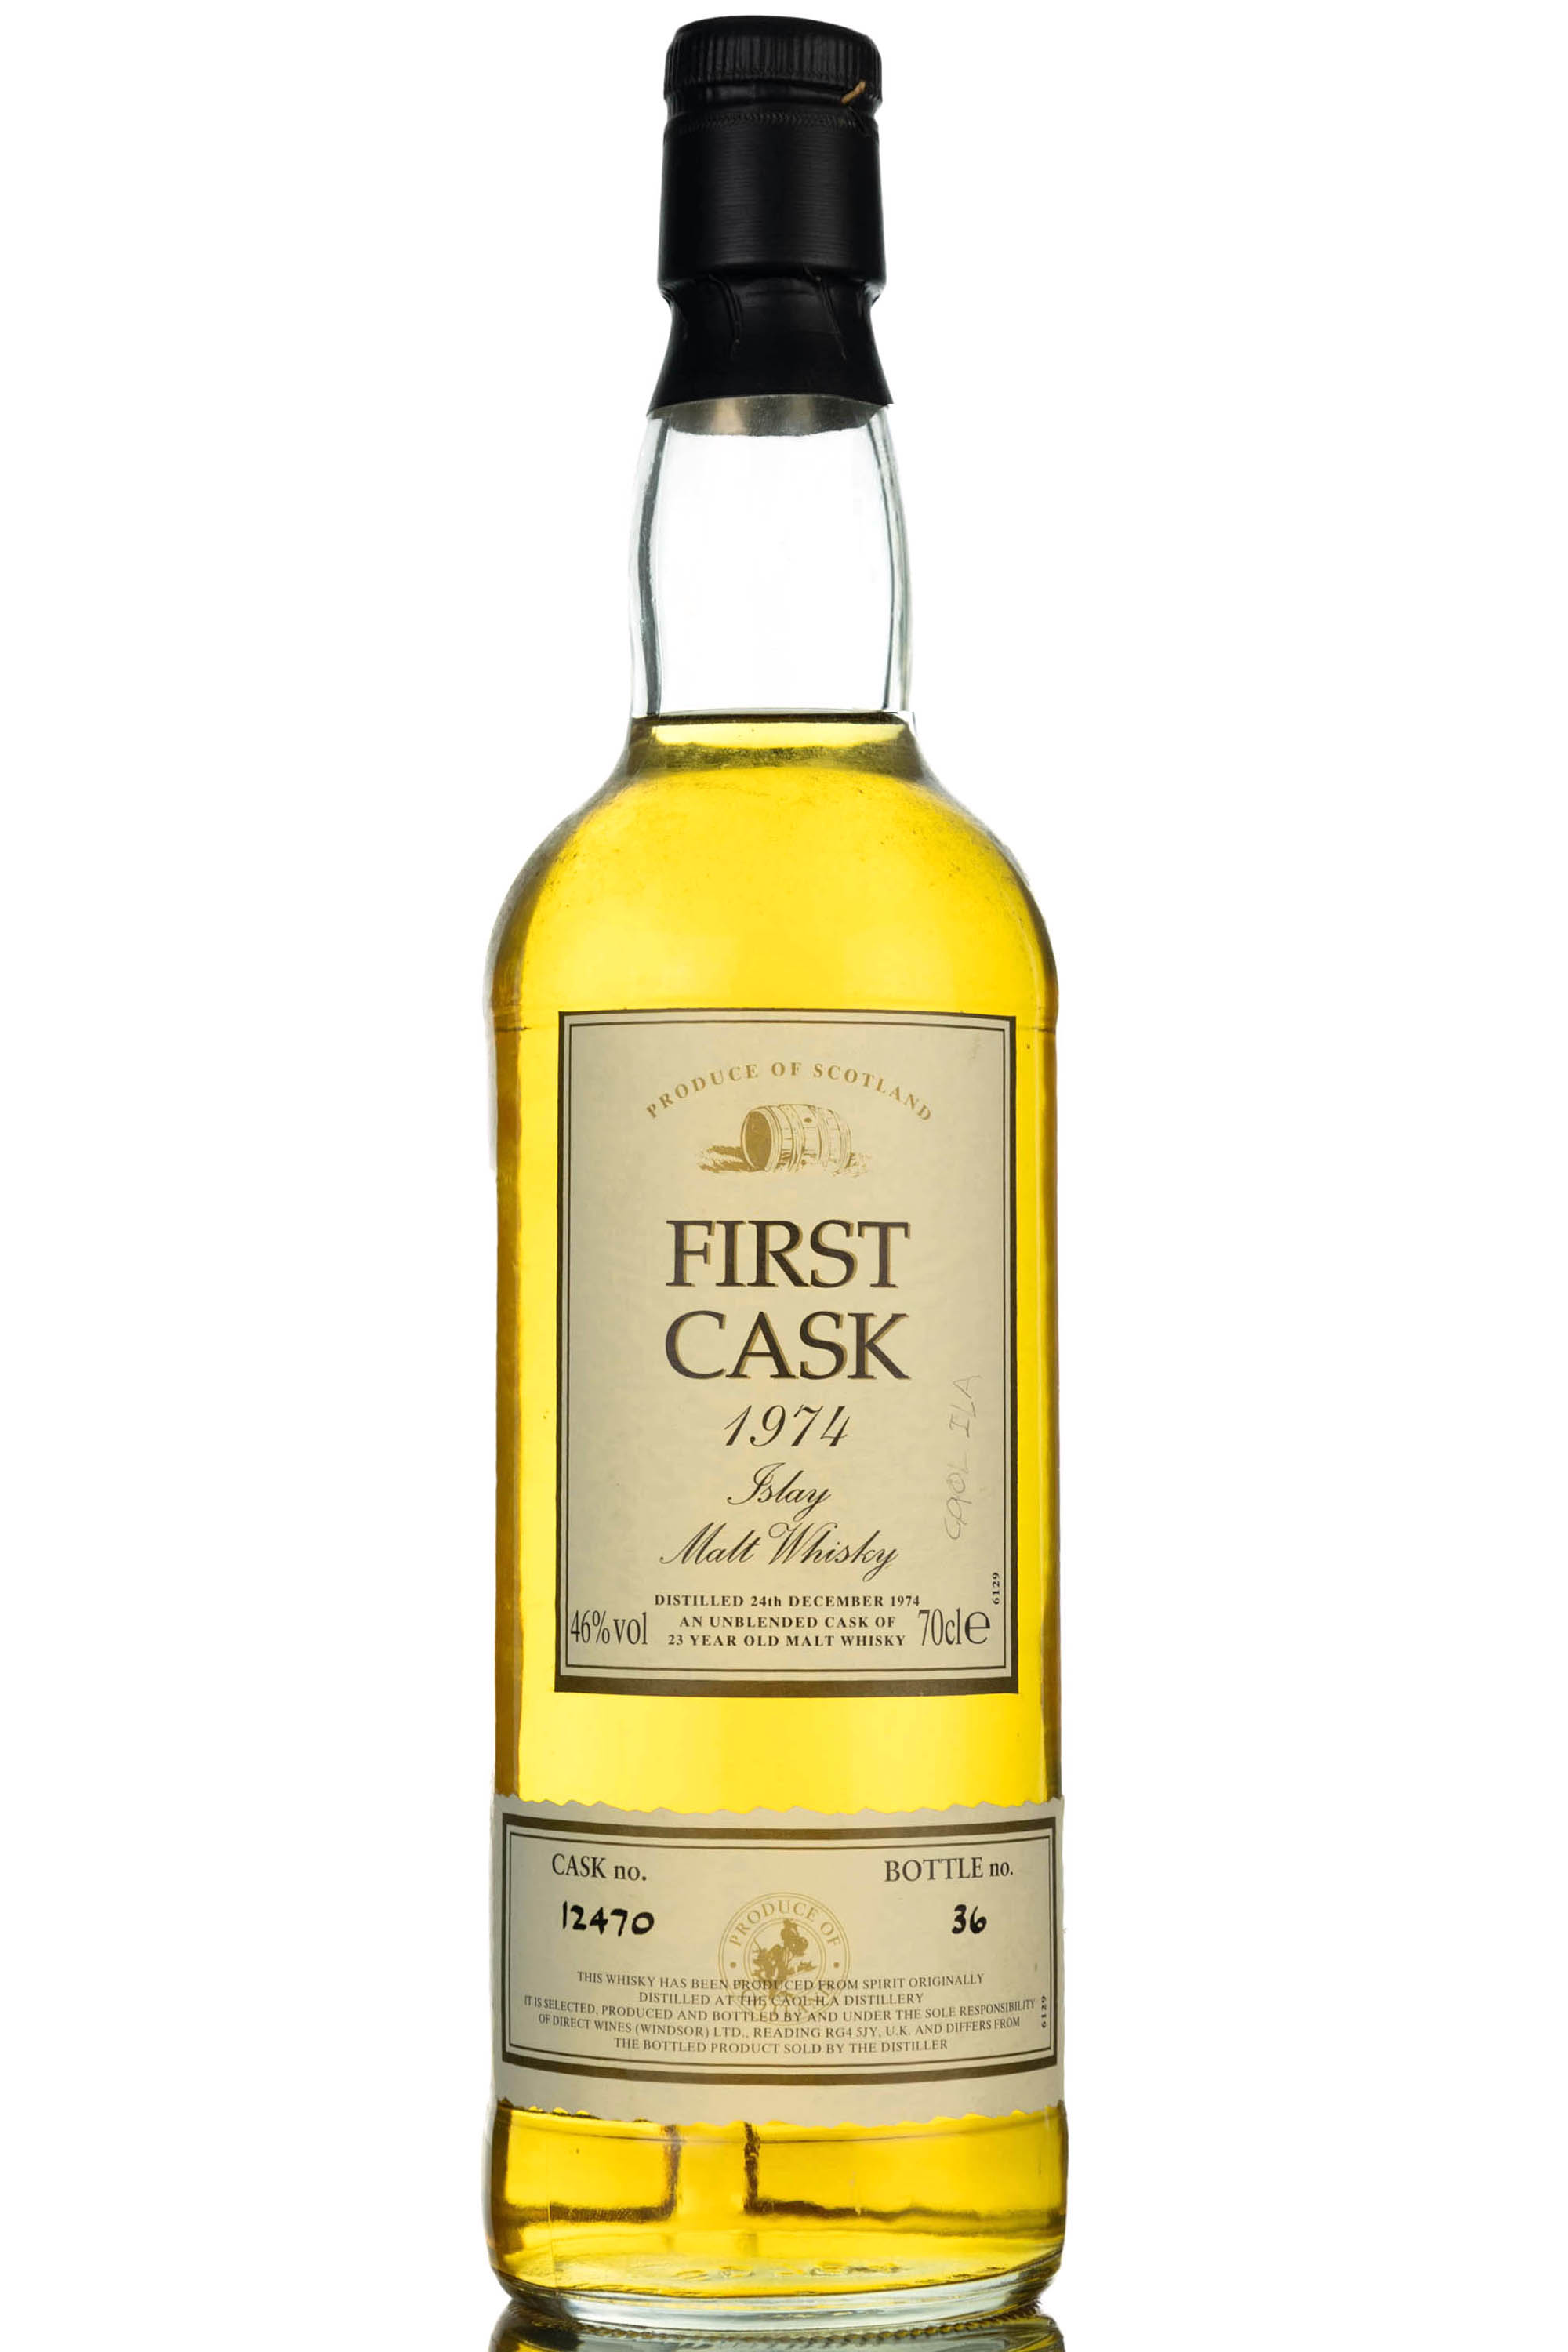 Caol Ila 1974 - 23 Year Old - First Cask - Single Cack 12470